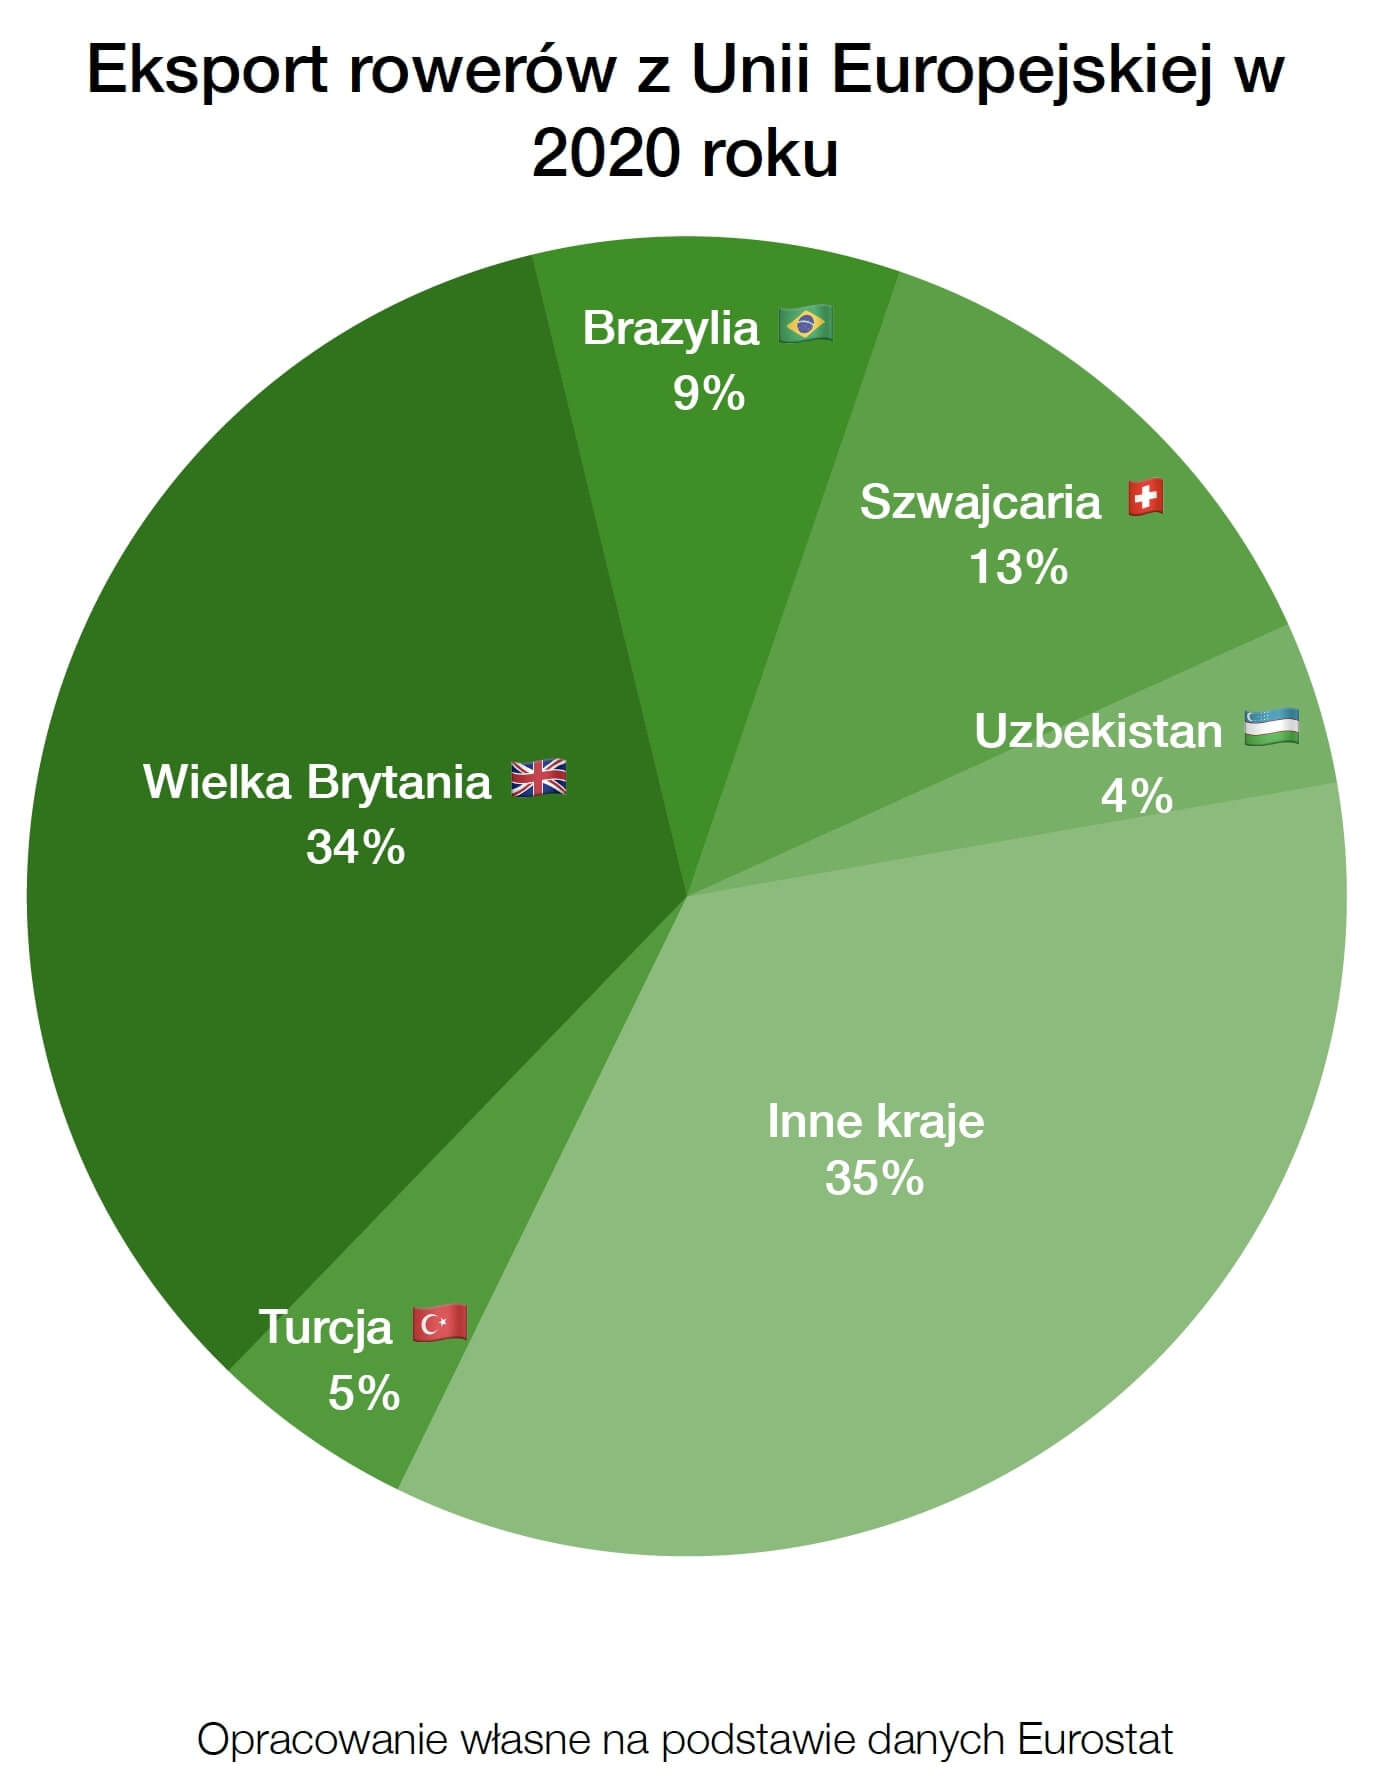 Market for Electric and Traditional Bicycles in the European Union 2020 - export volume data